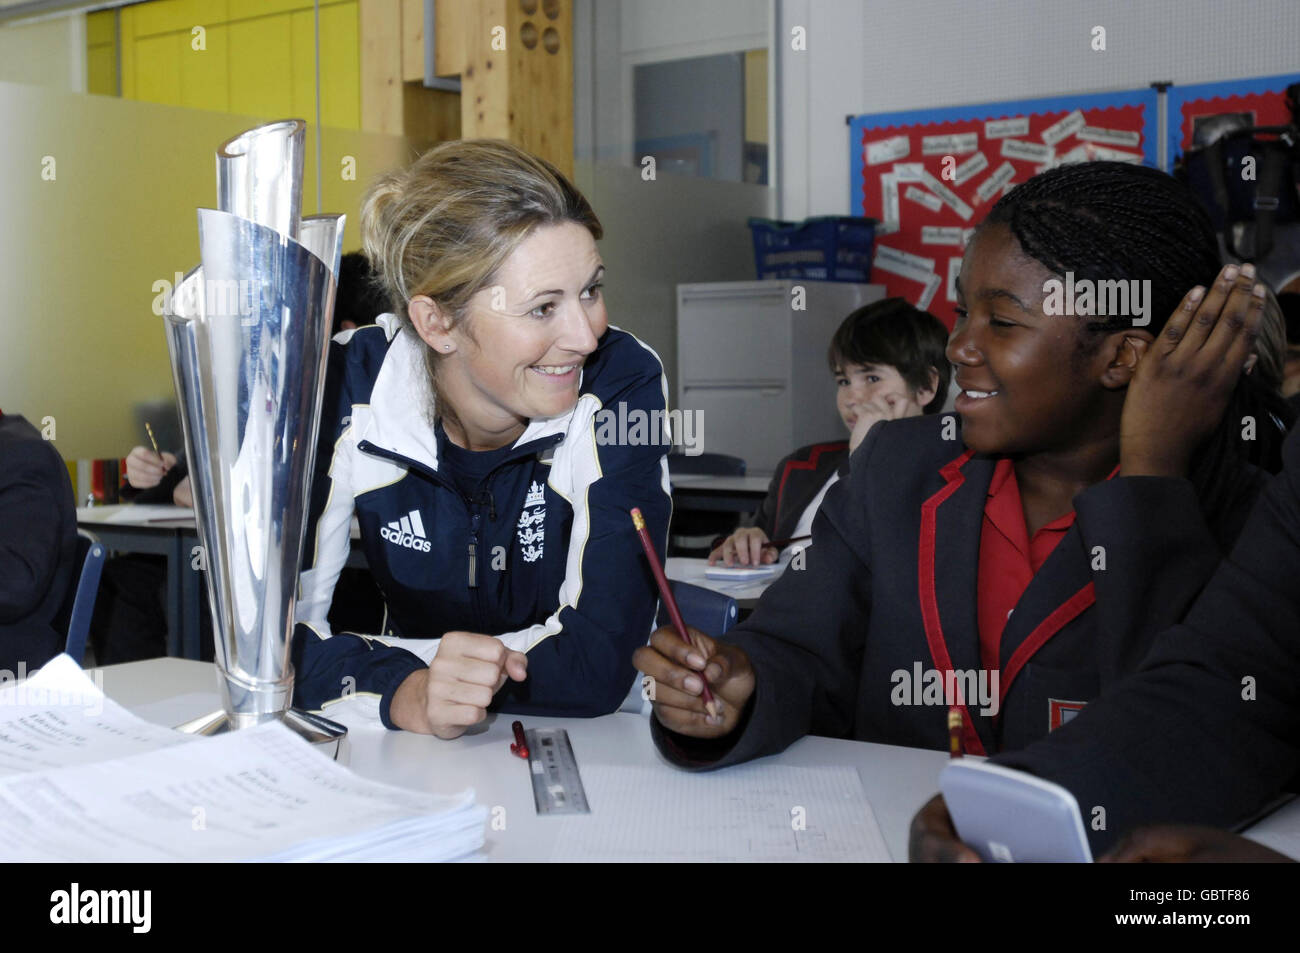 Charlotte Edwards, England Women's Cricket Captain, gives advice to Shannel Caleb-Carter, aged 12, at Mossbourne Community Academy in Hackney, east London during the Cricket Foundation's Chance to shine National Cricket Day. Stock Photo